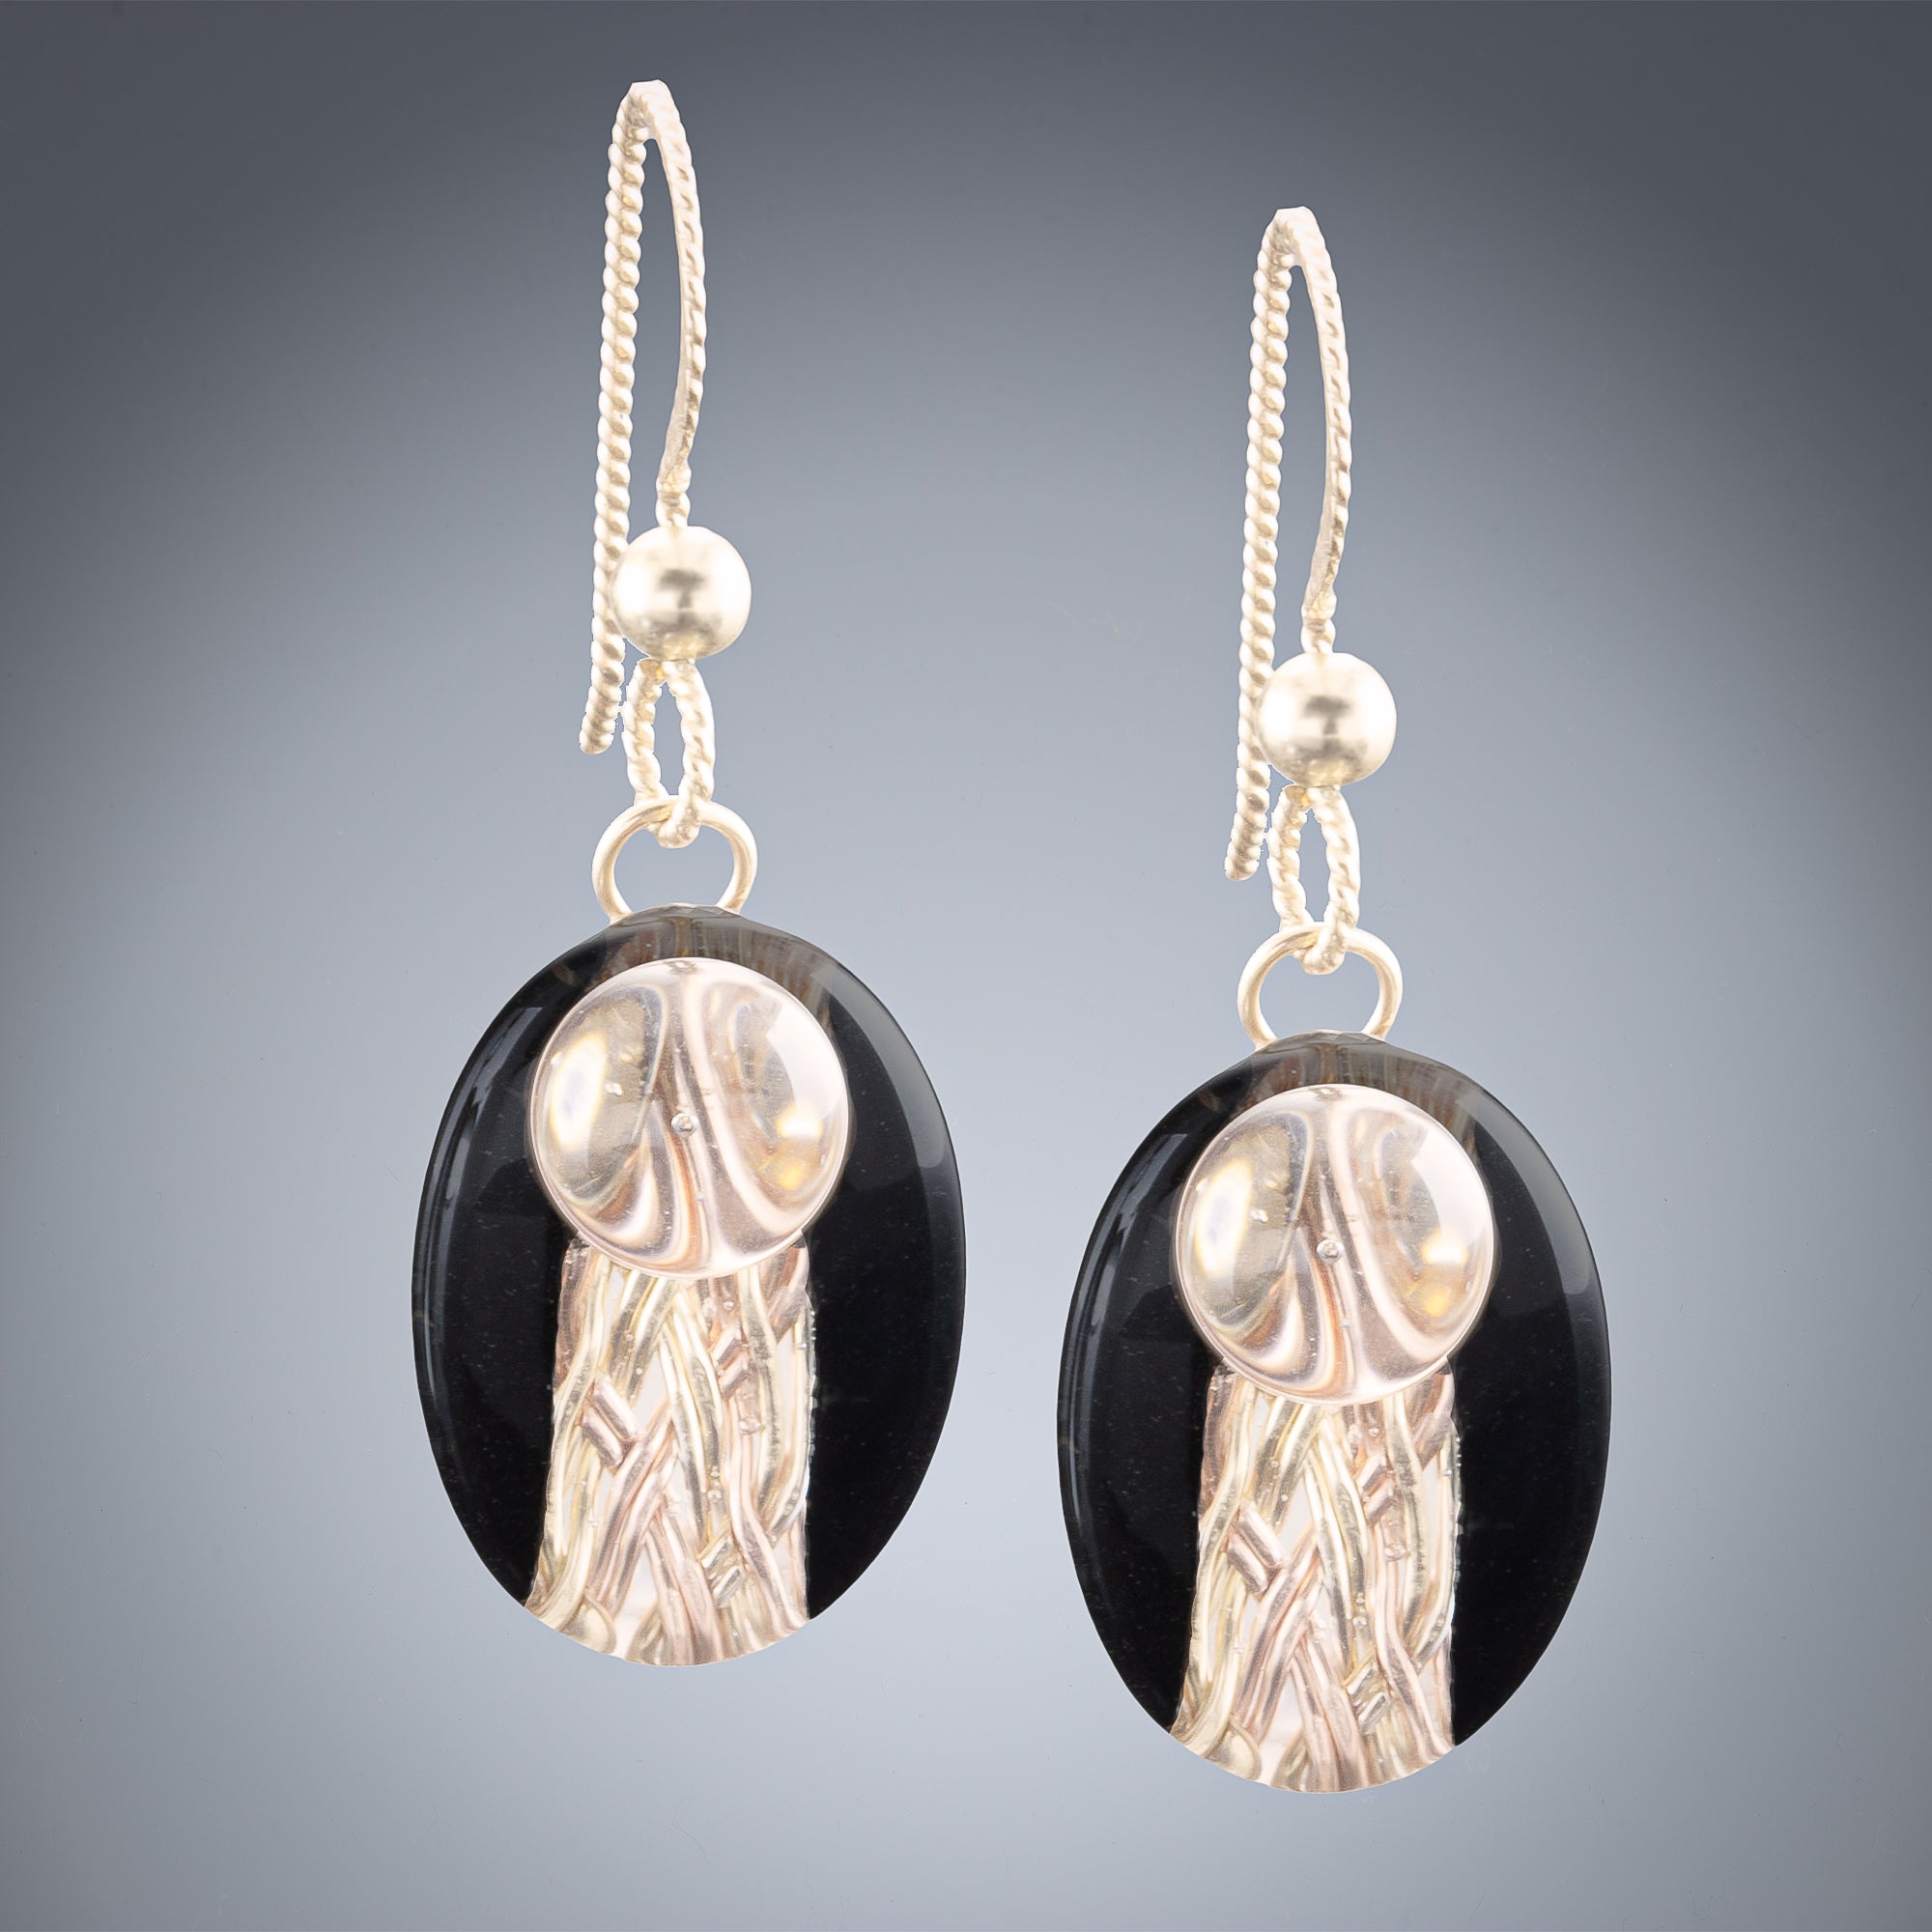 Handwoven Oval Black and Gold Art Deco Inspired Earrings in both 14K Yellow and Rose Gold Fill